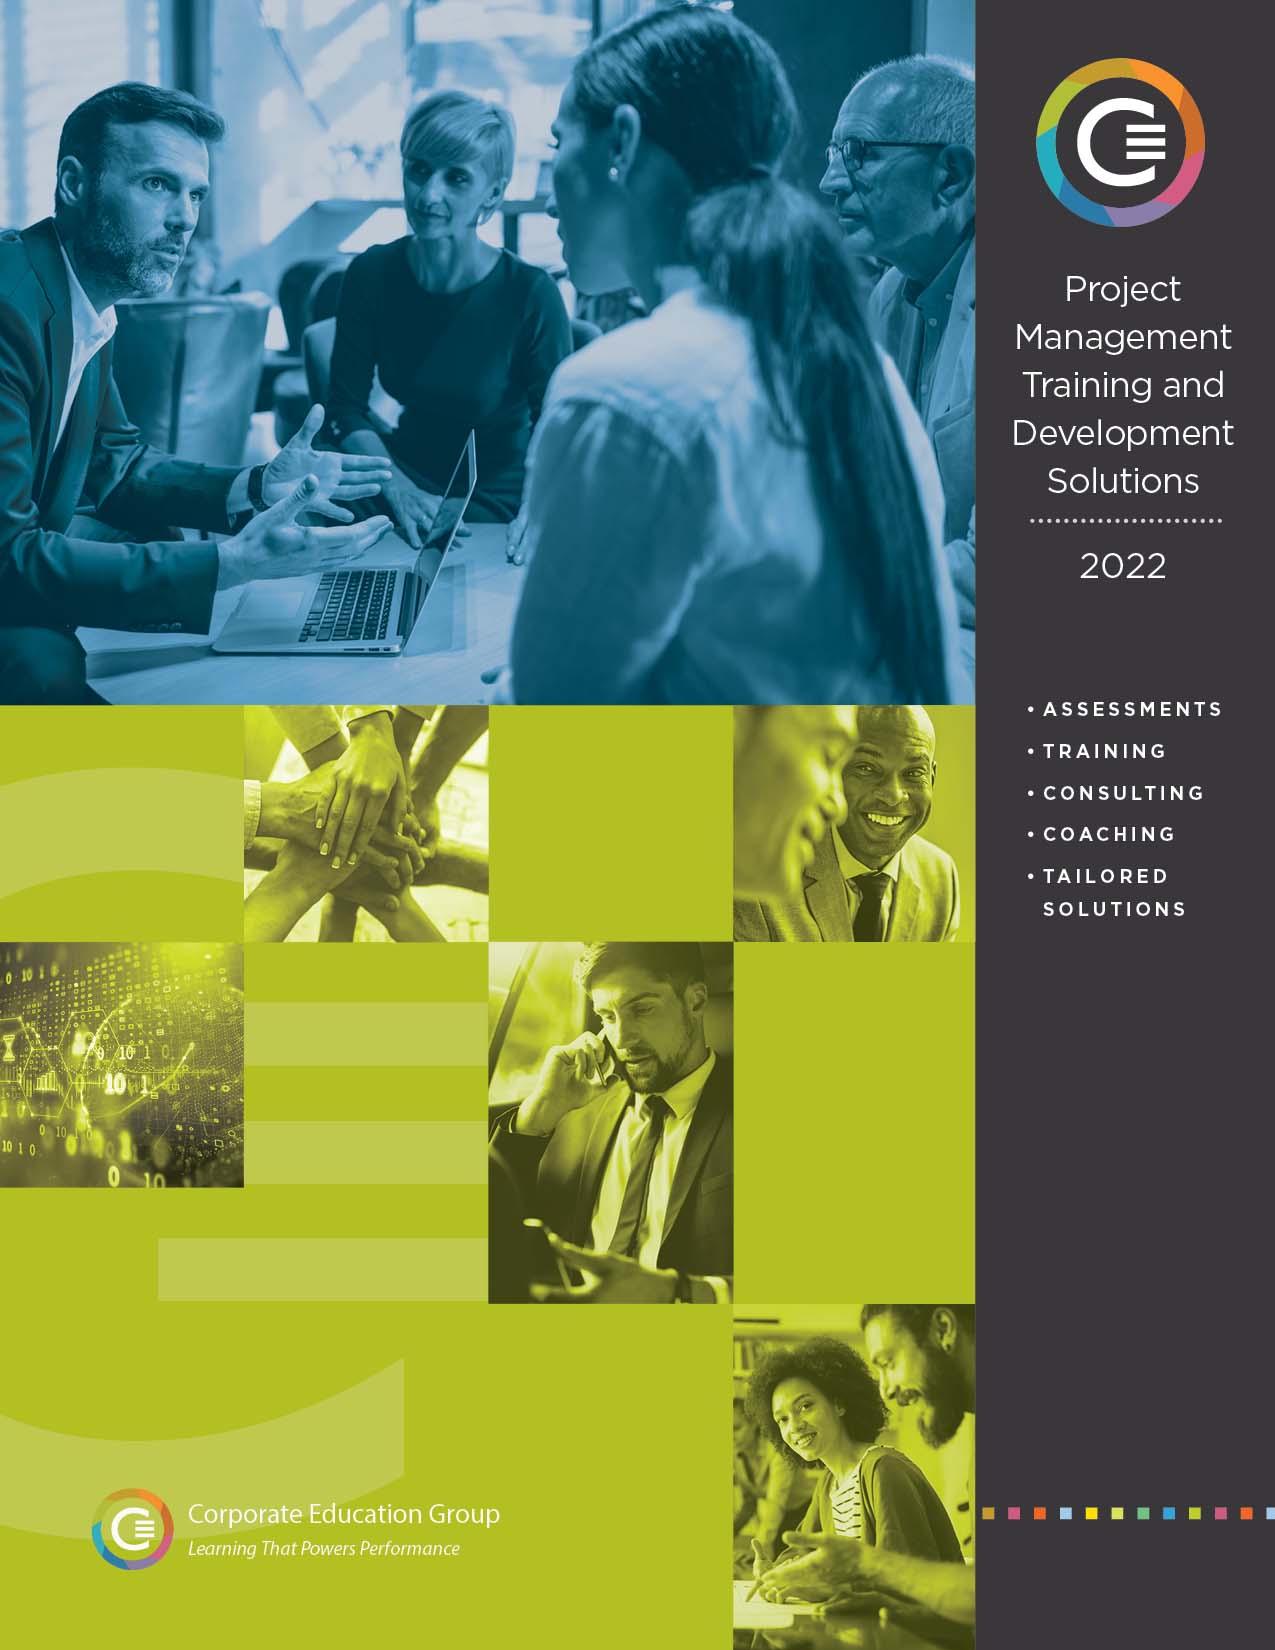 Project Management Training and Development Solutions 2022 Catalog Cover